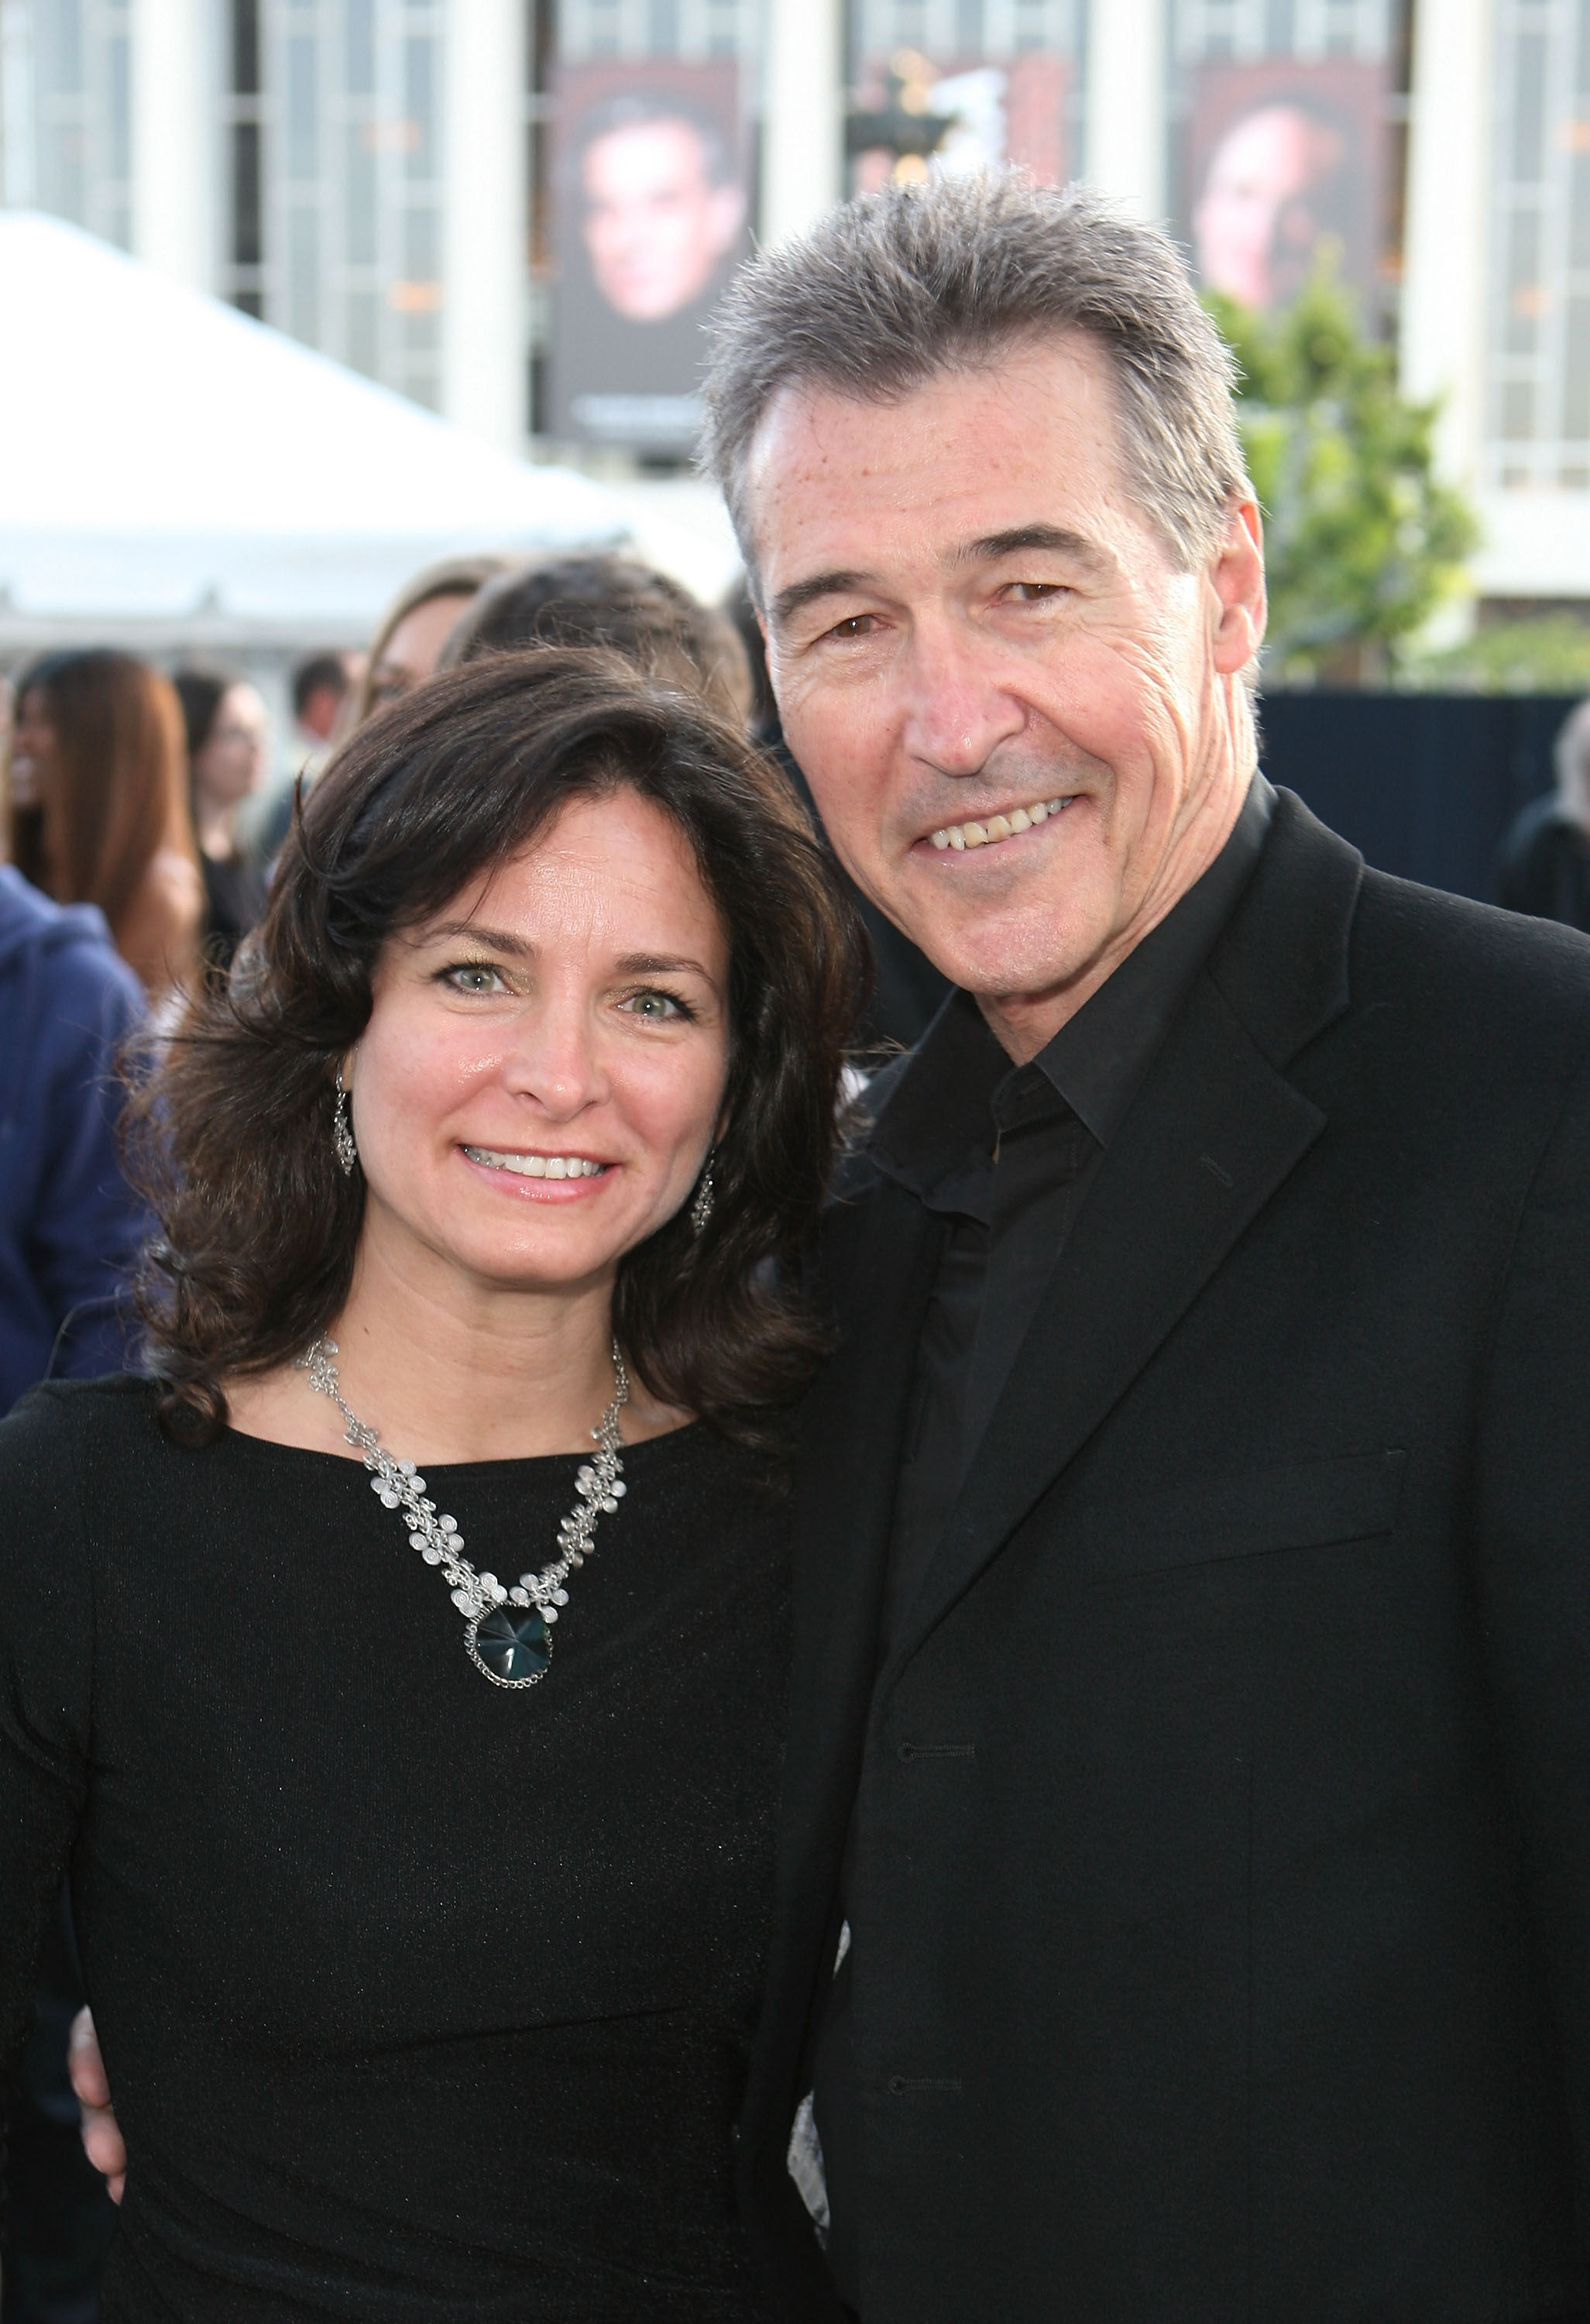 Randolph Mantooth and Kristen Conners at opening night of "Bengal Tiger at the Baghdad Zoo"in 2010 | Source: Getty Images